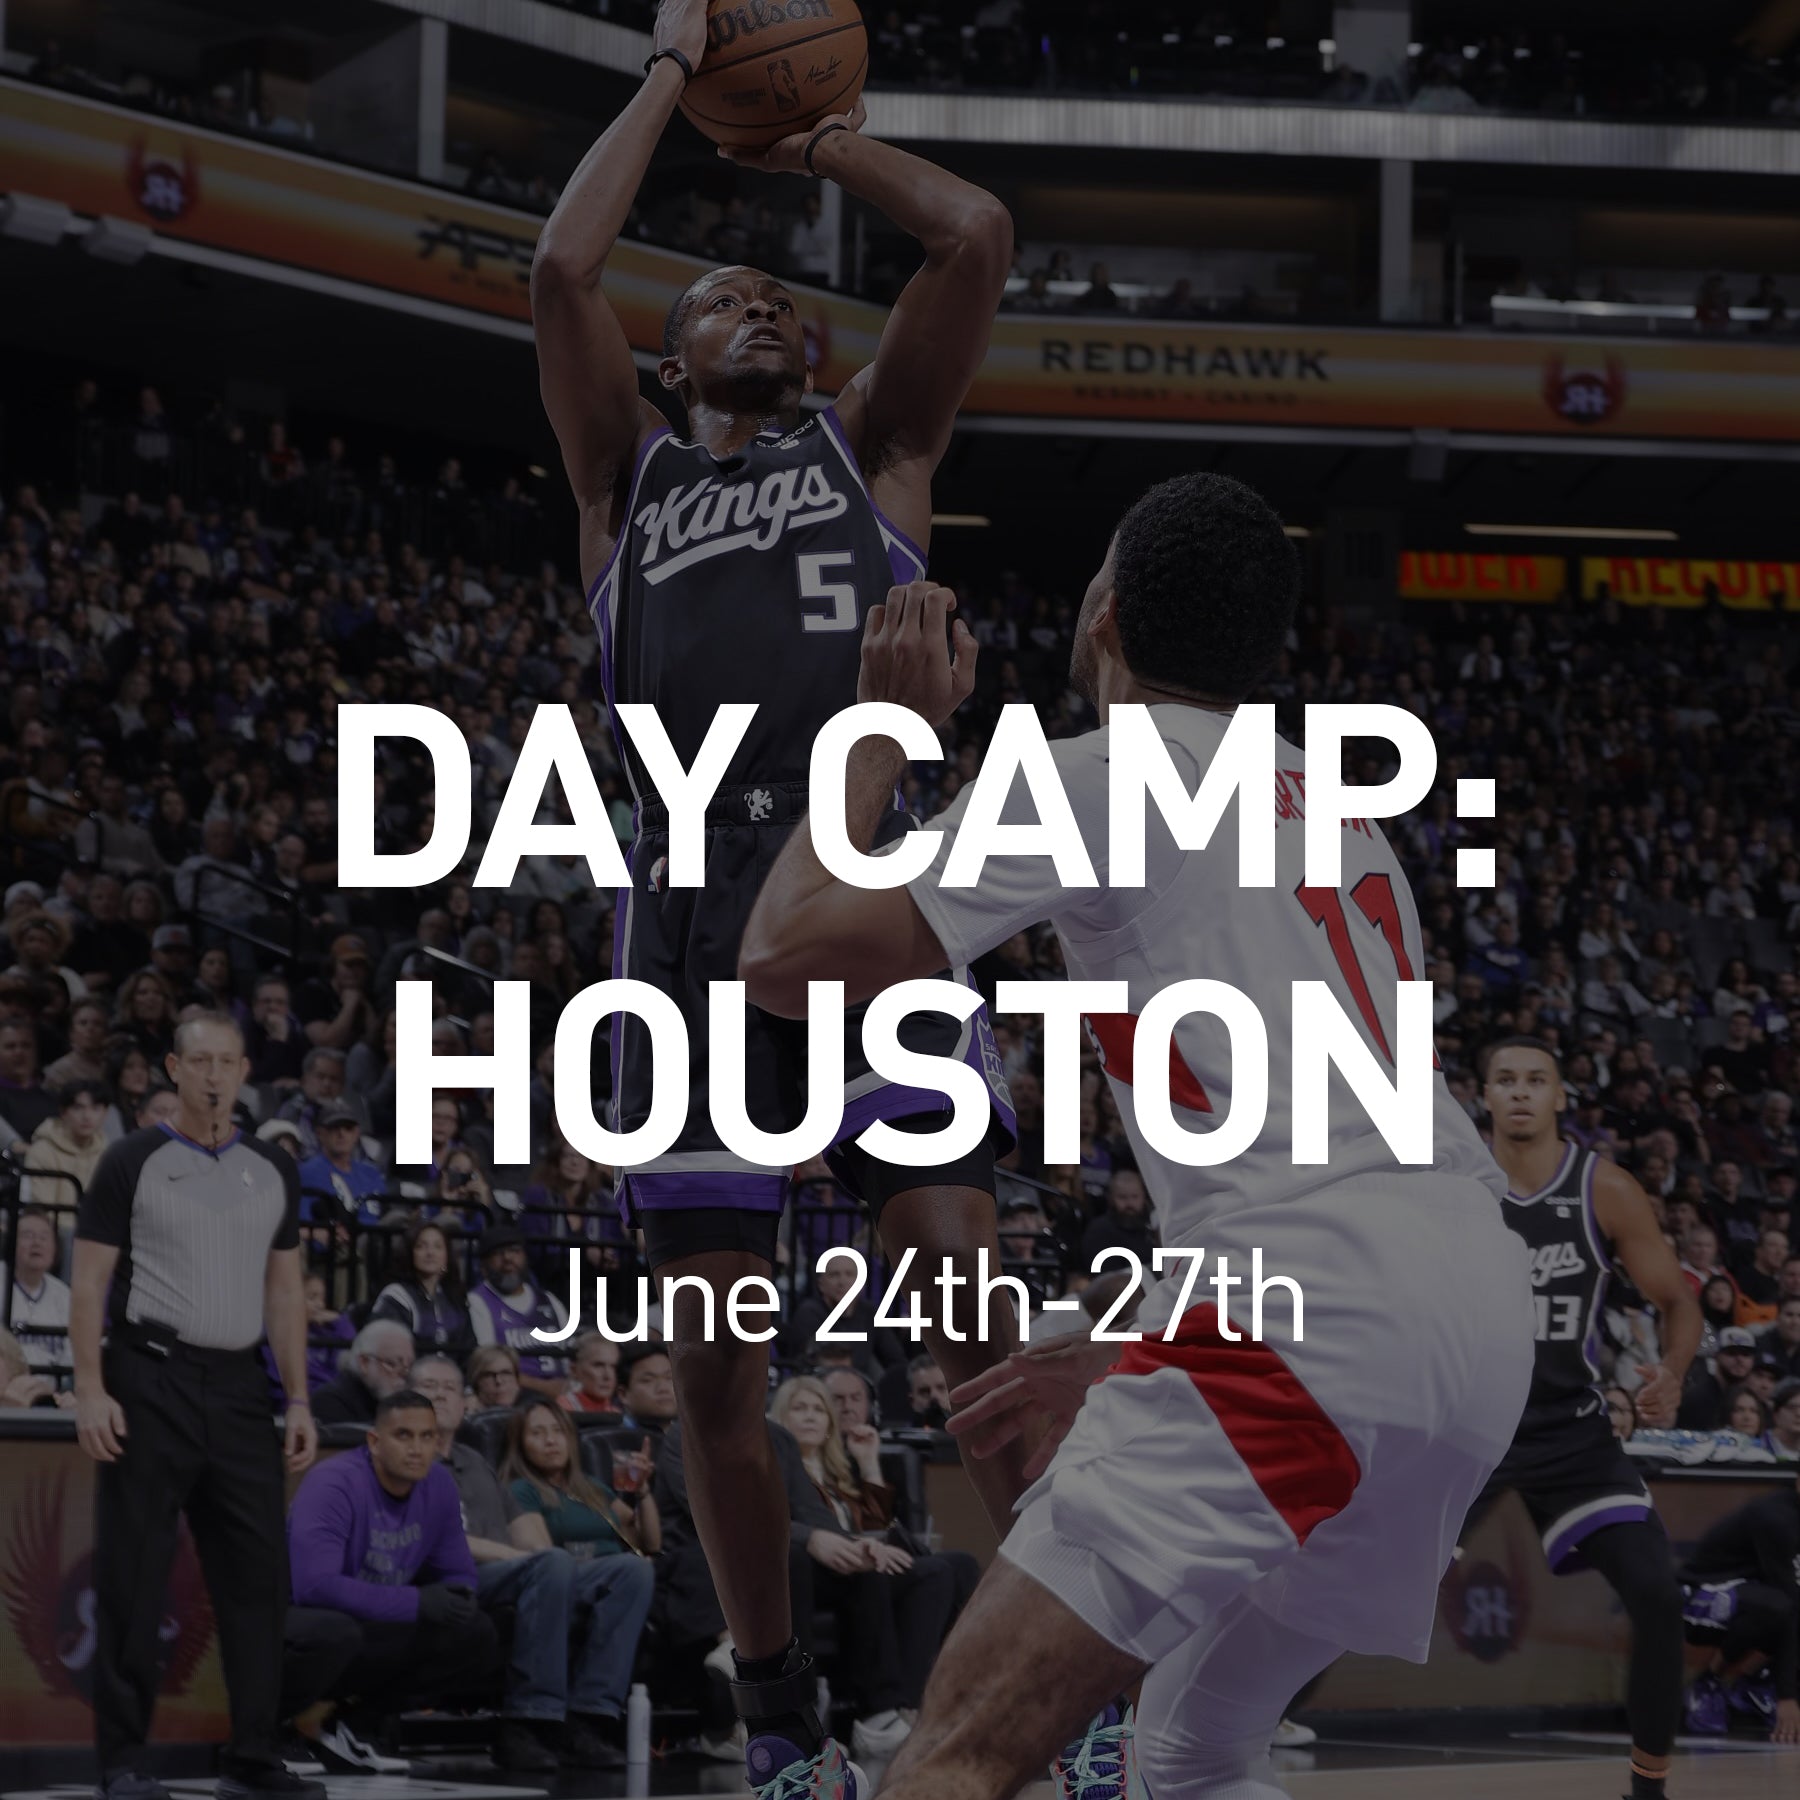 Day Camp: Houston June 24 - 27th